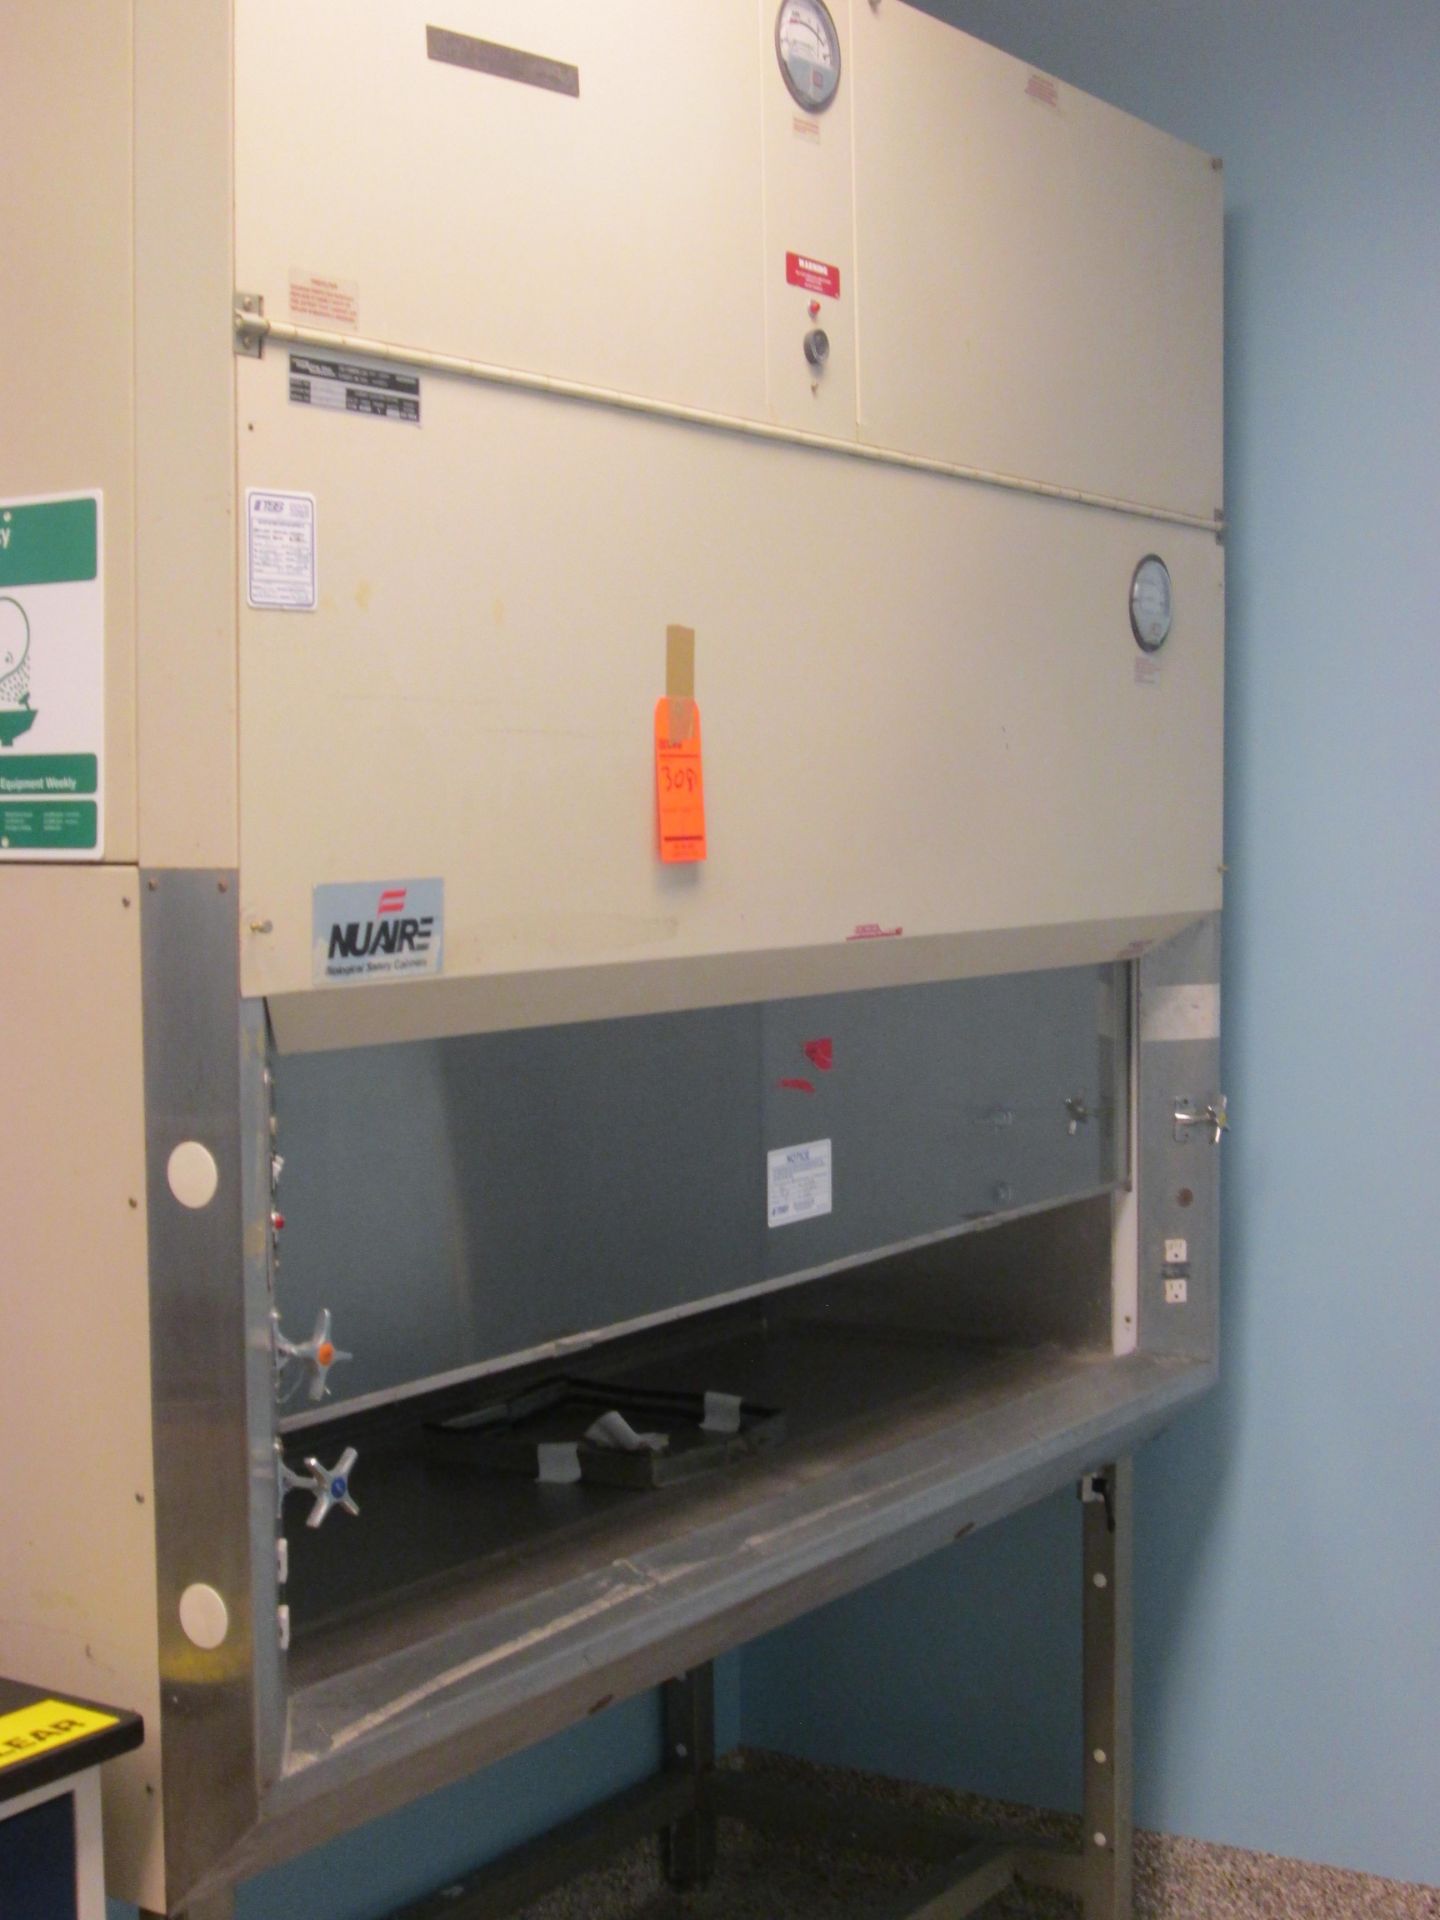 Lot consisting of contents of room includes (1) NuAire Safety Cabinet, m/n NU-415-600, (1) - Image 2 of 8